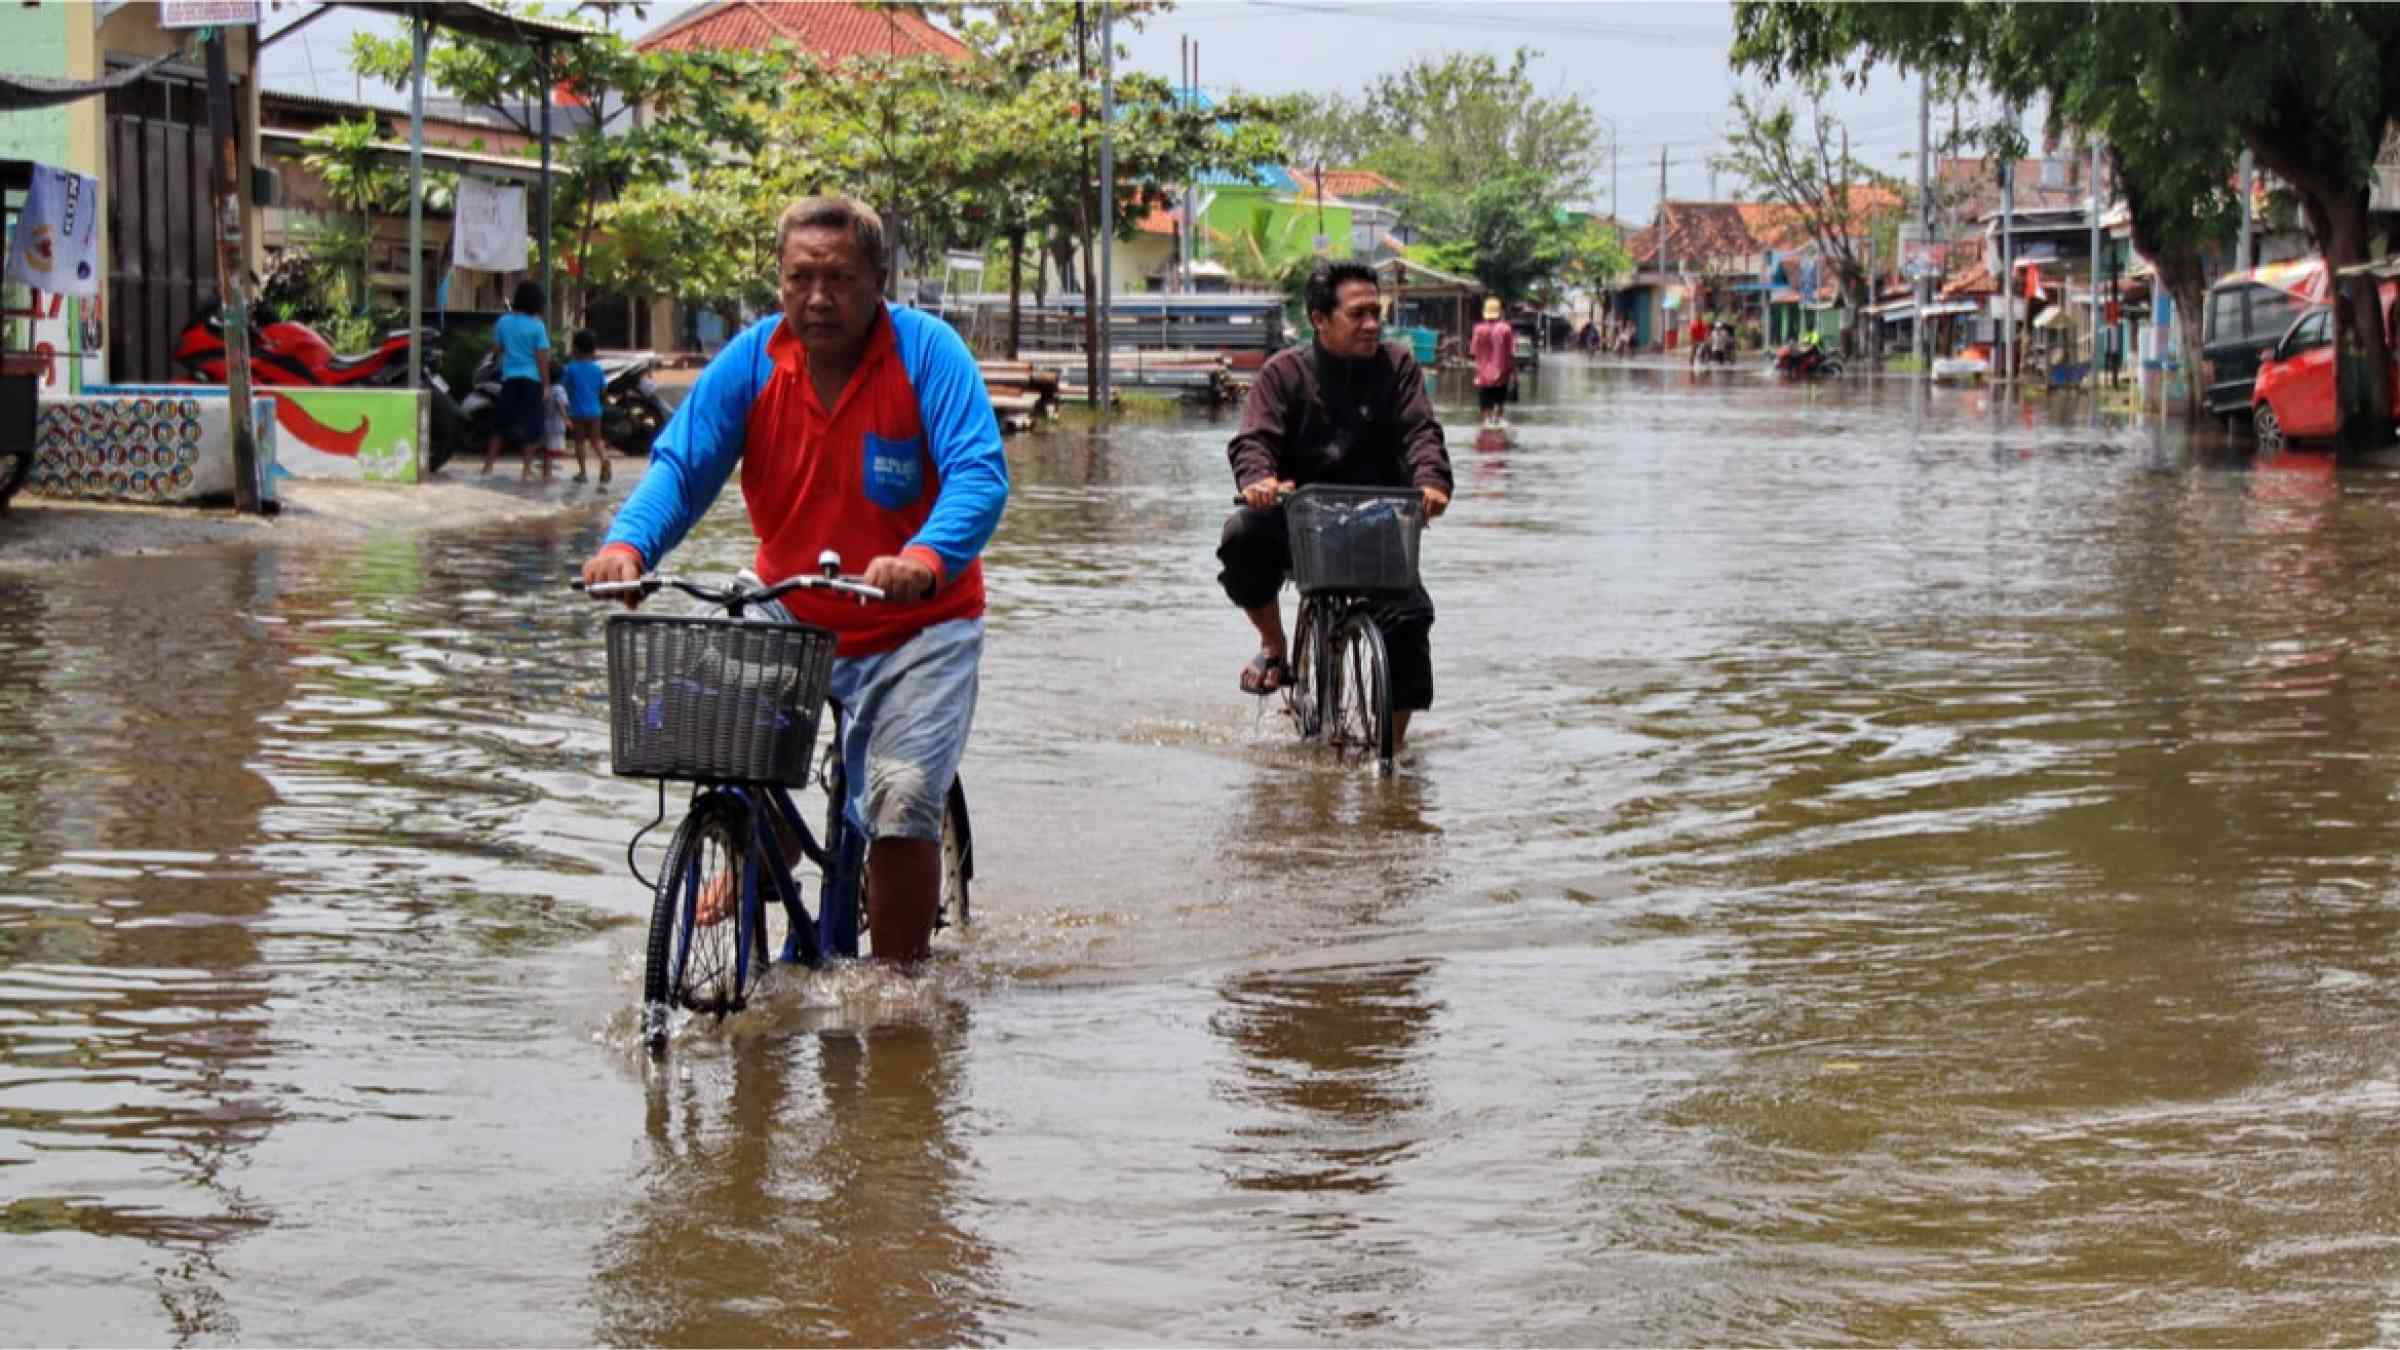 Cyclists driving through flooded streets in Pekalongan, Indonesia (2021)